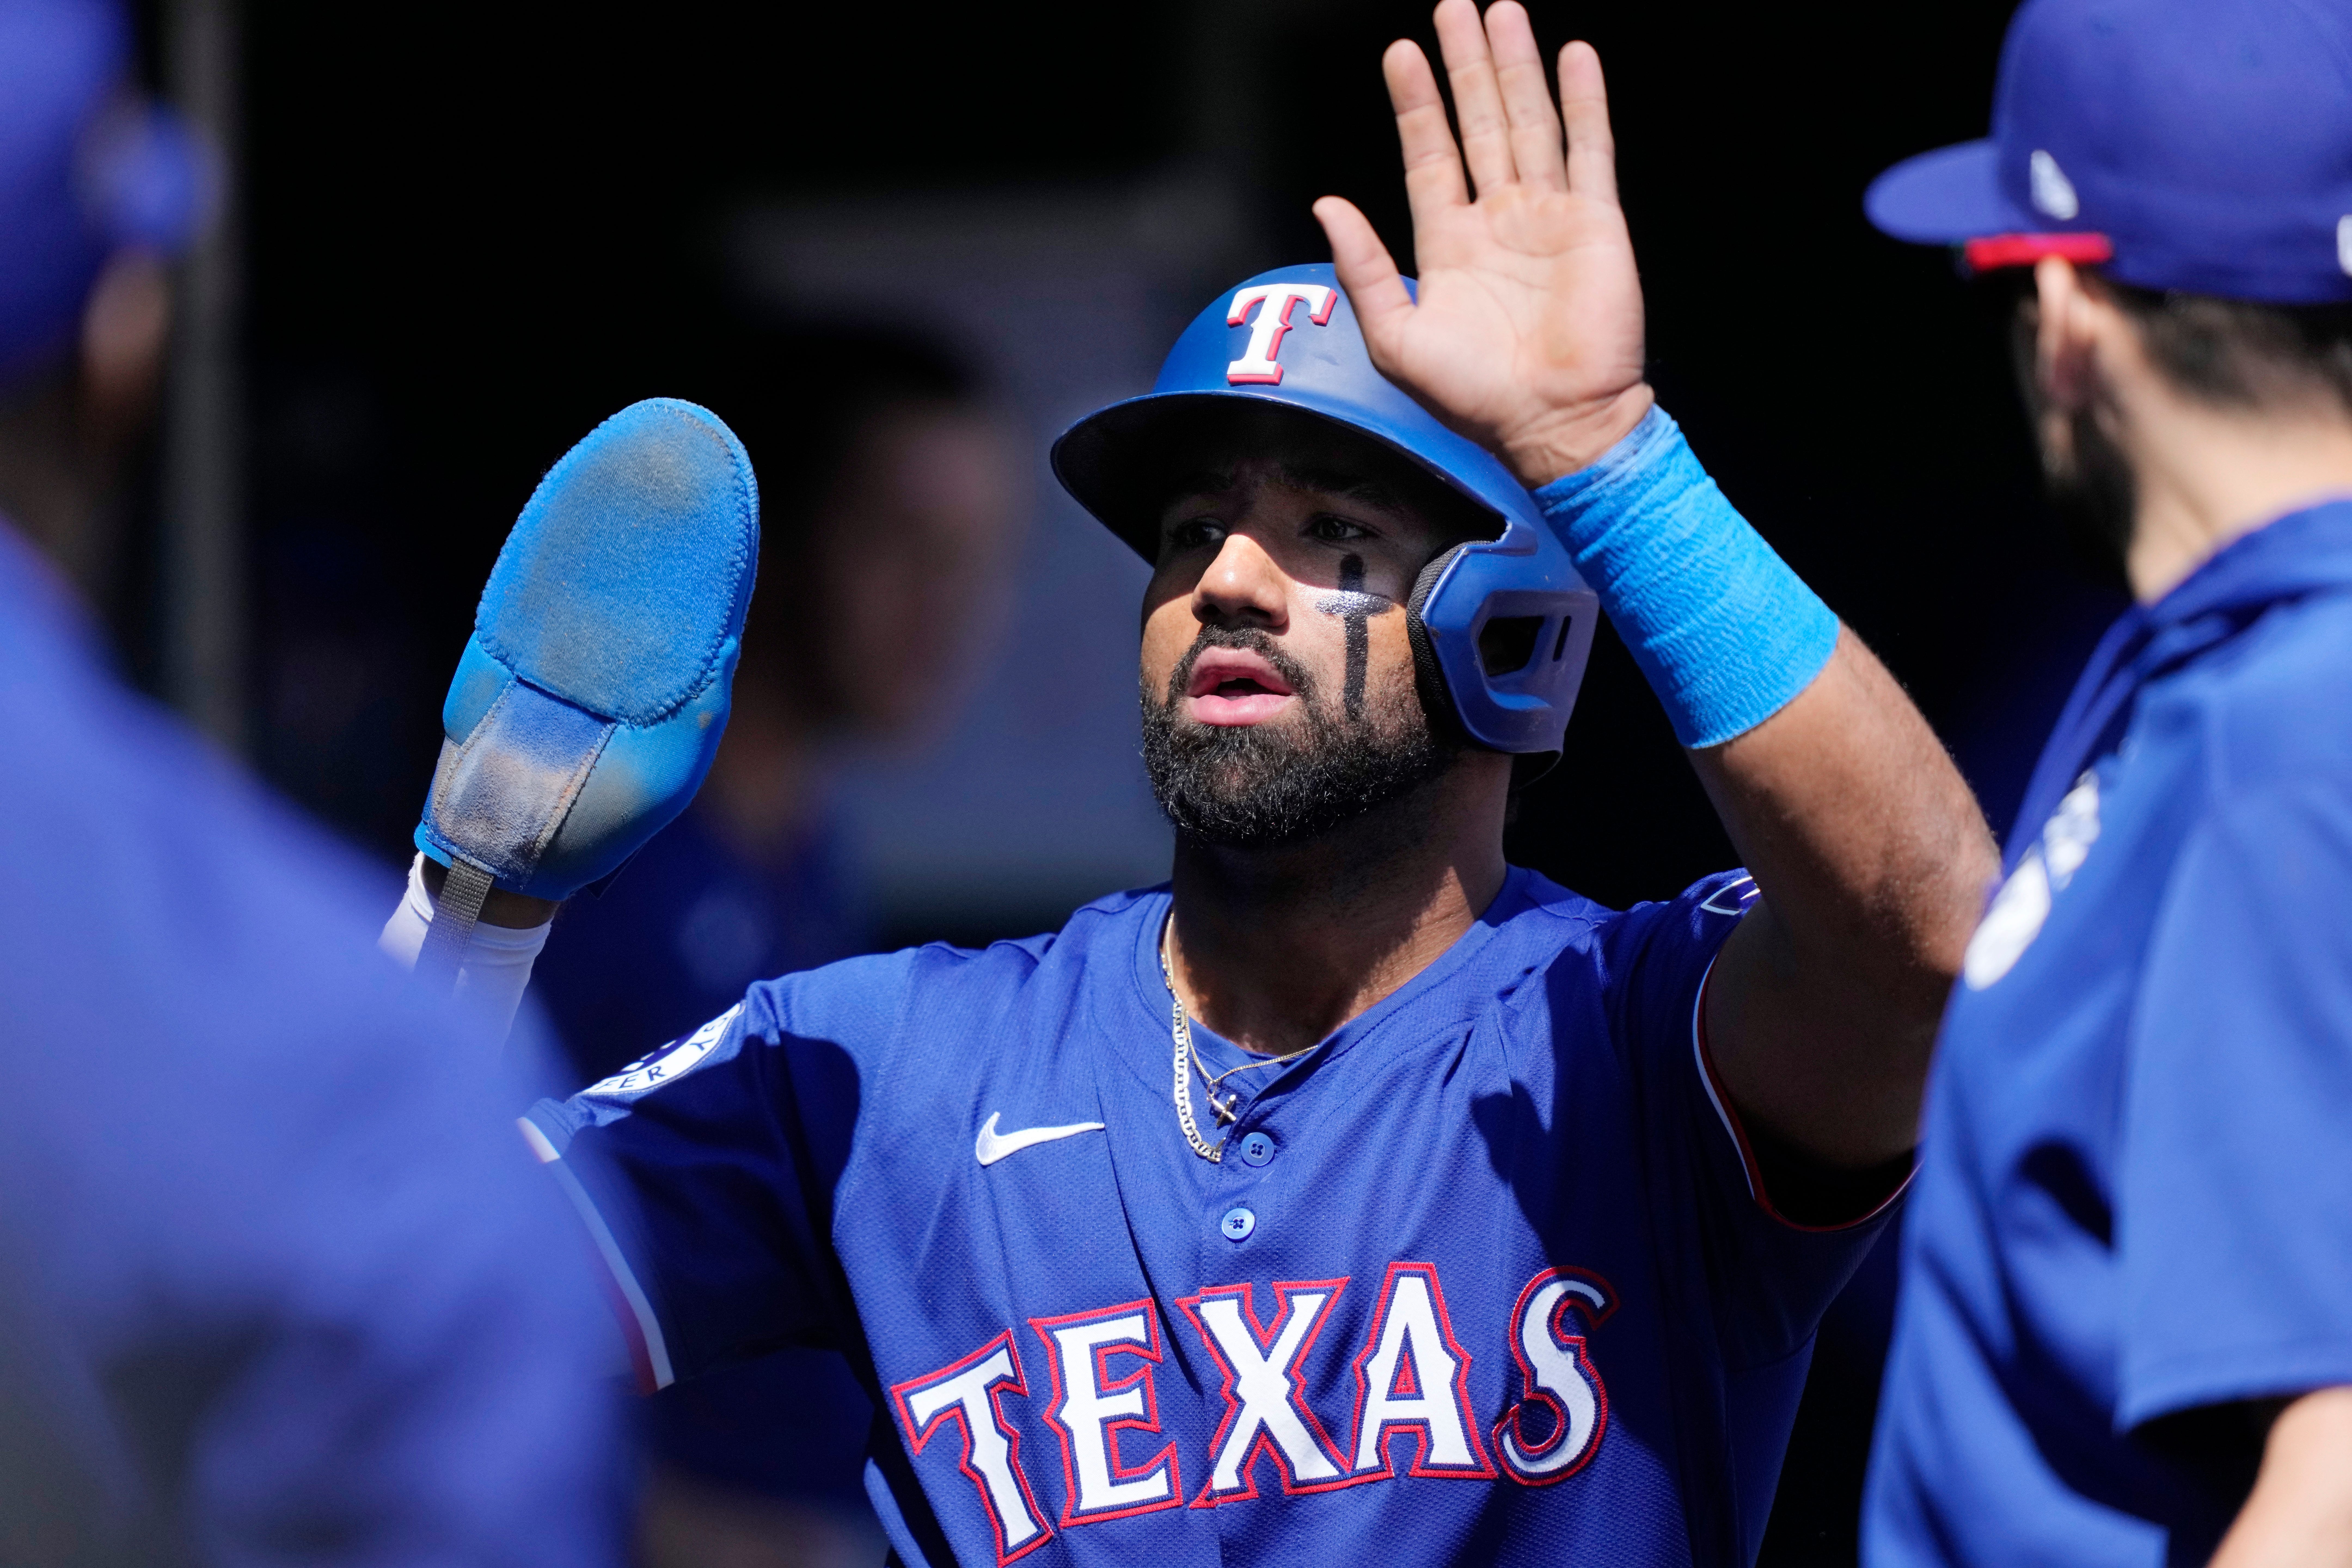 Texas Rangers designated hitter Ezequiel Duran is greeted in the dugout after scoring during the fifth inning.